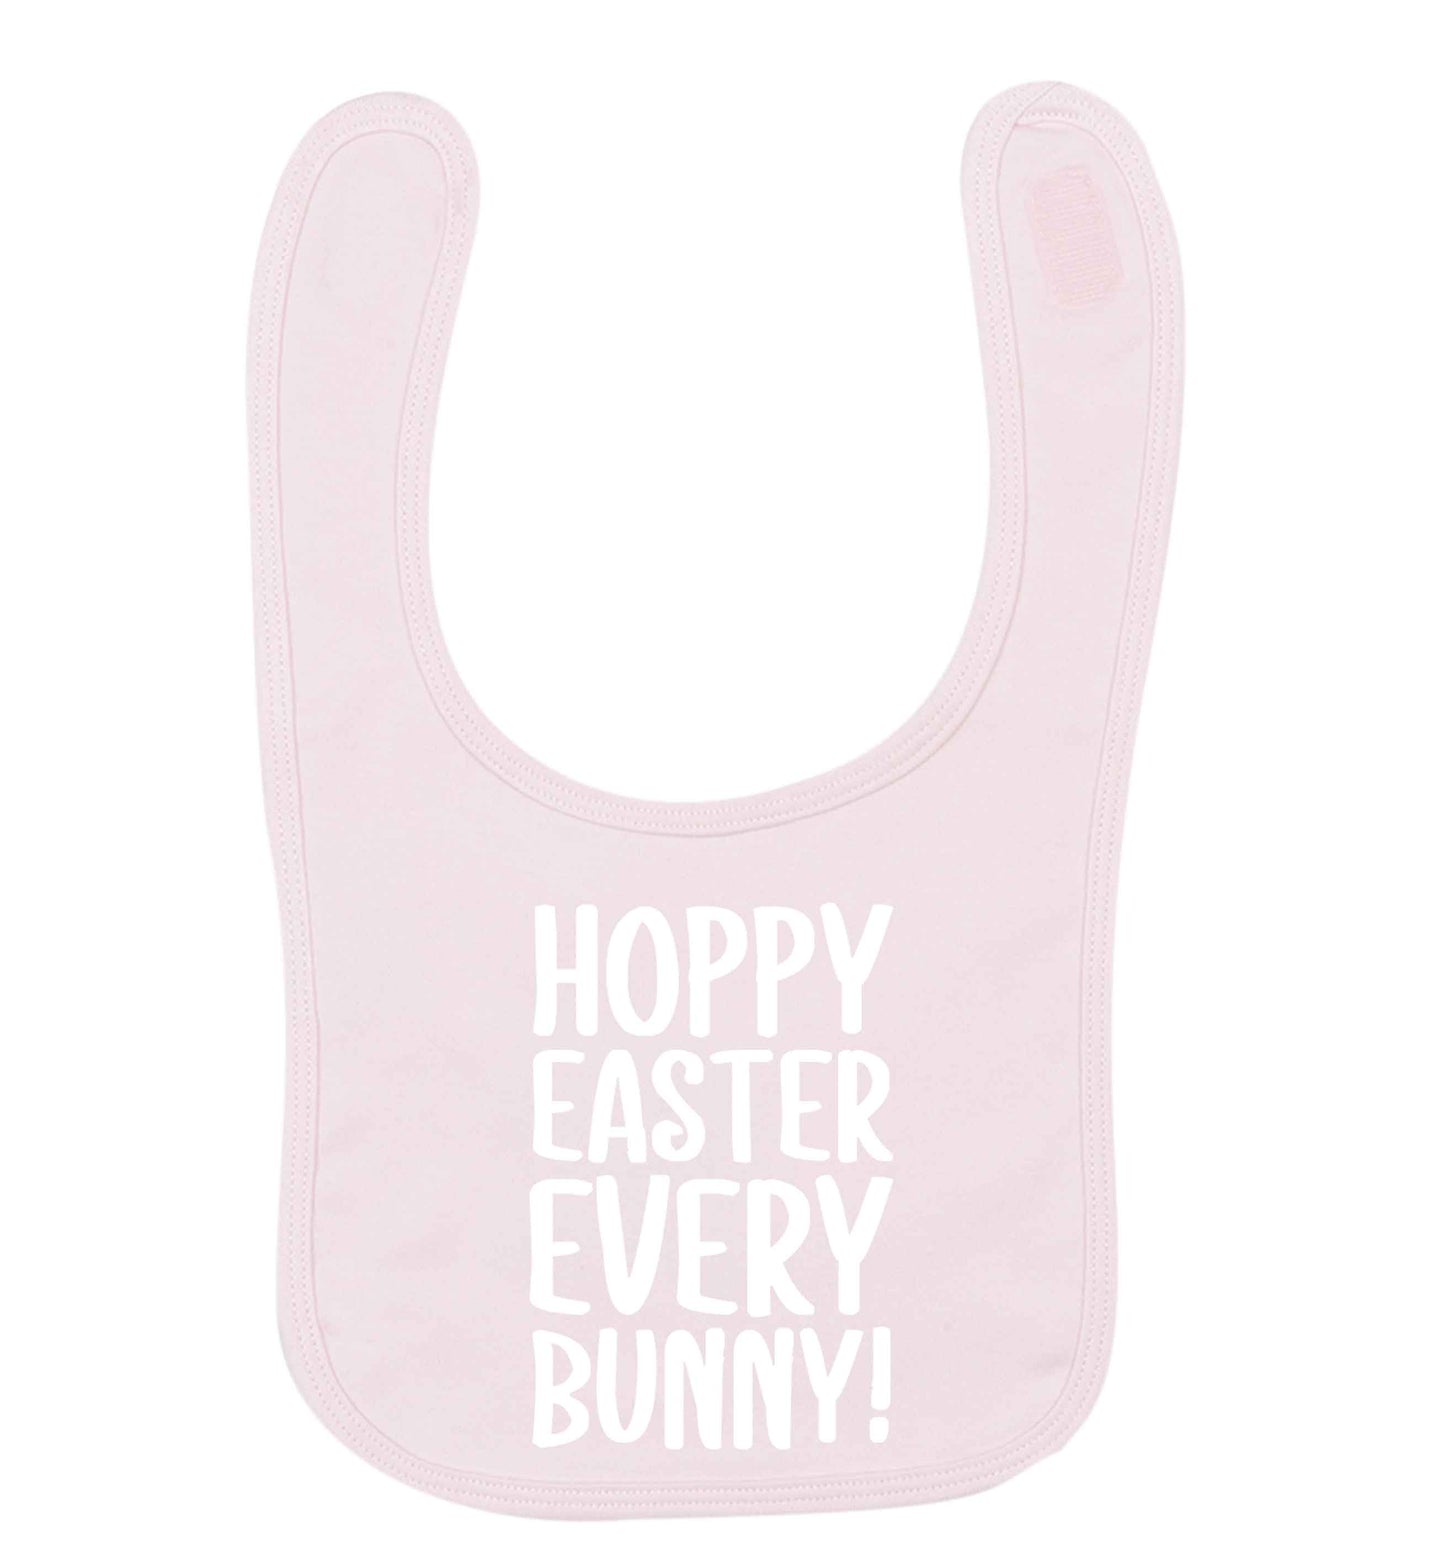 Hoppy Easter every bunny! pale pink baby bib